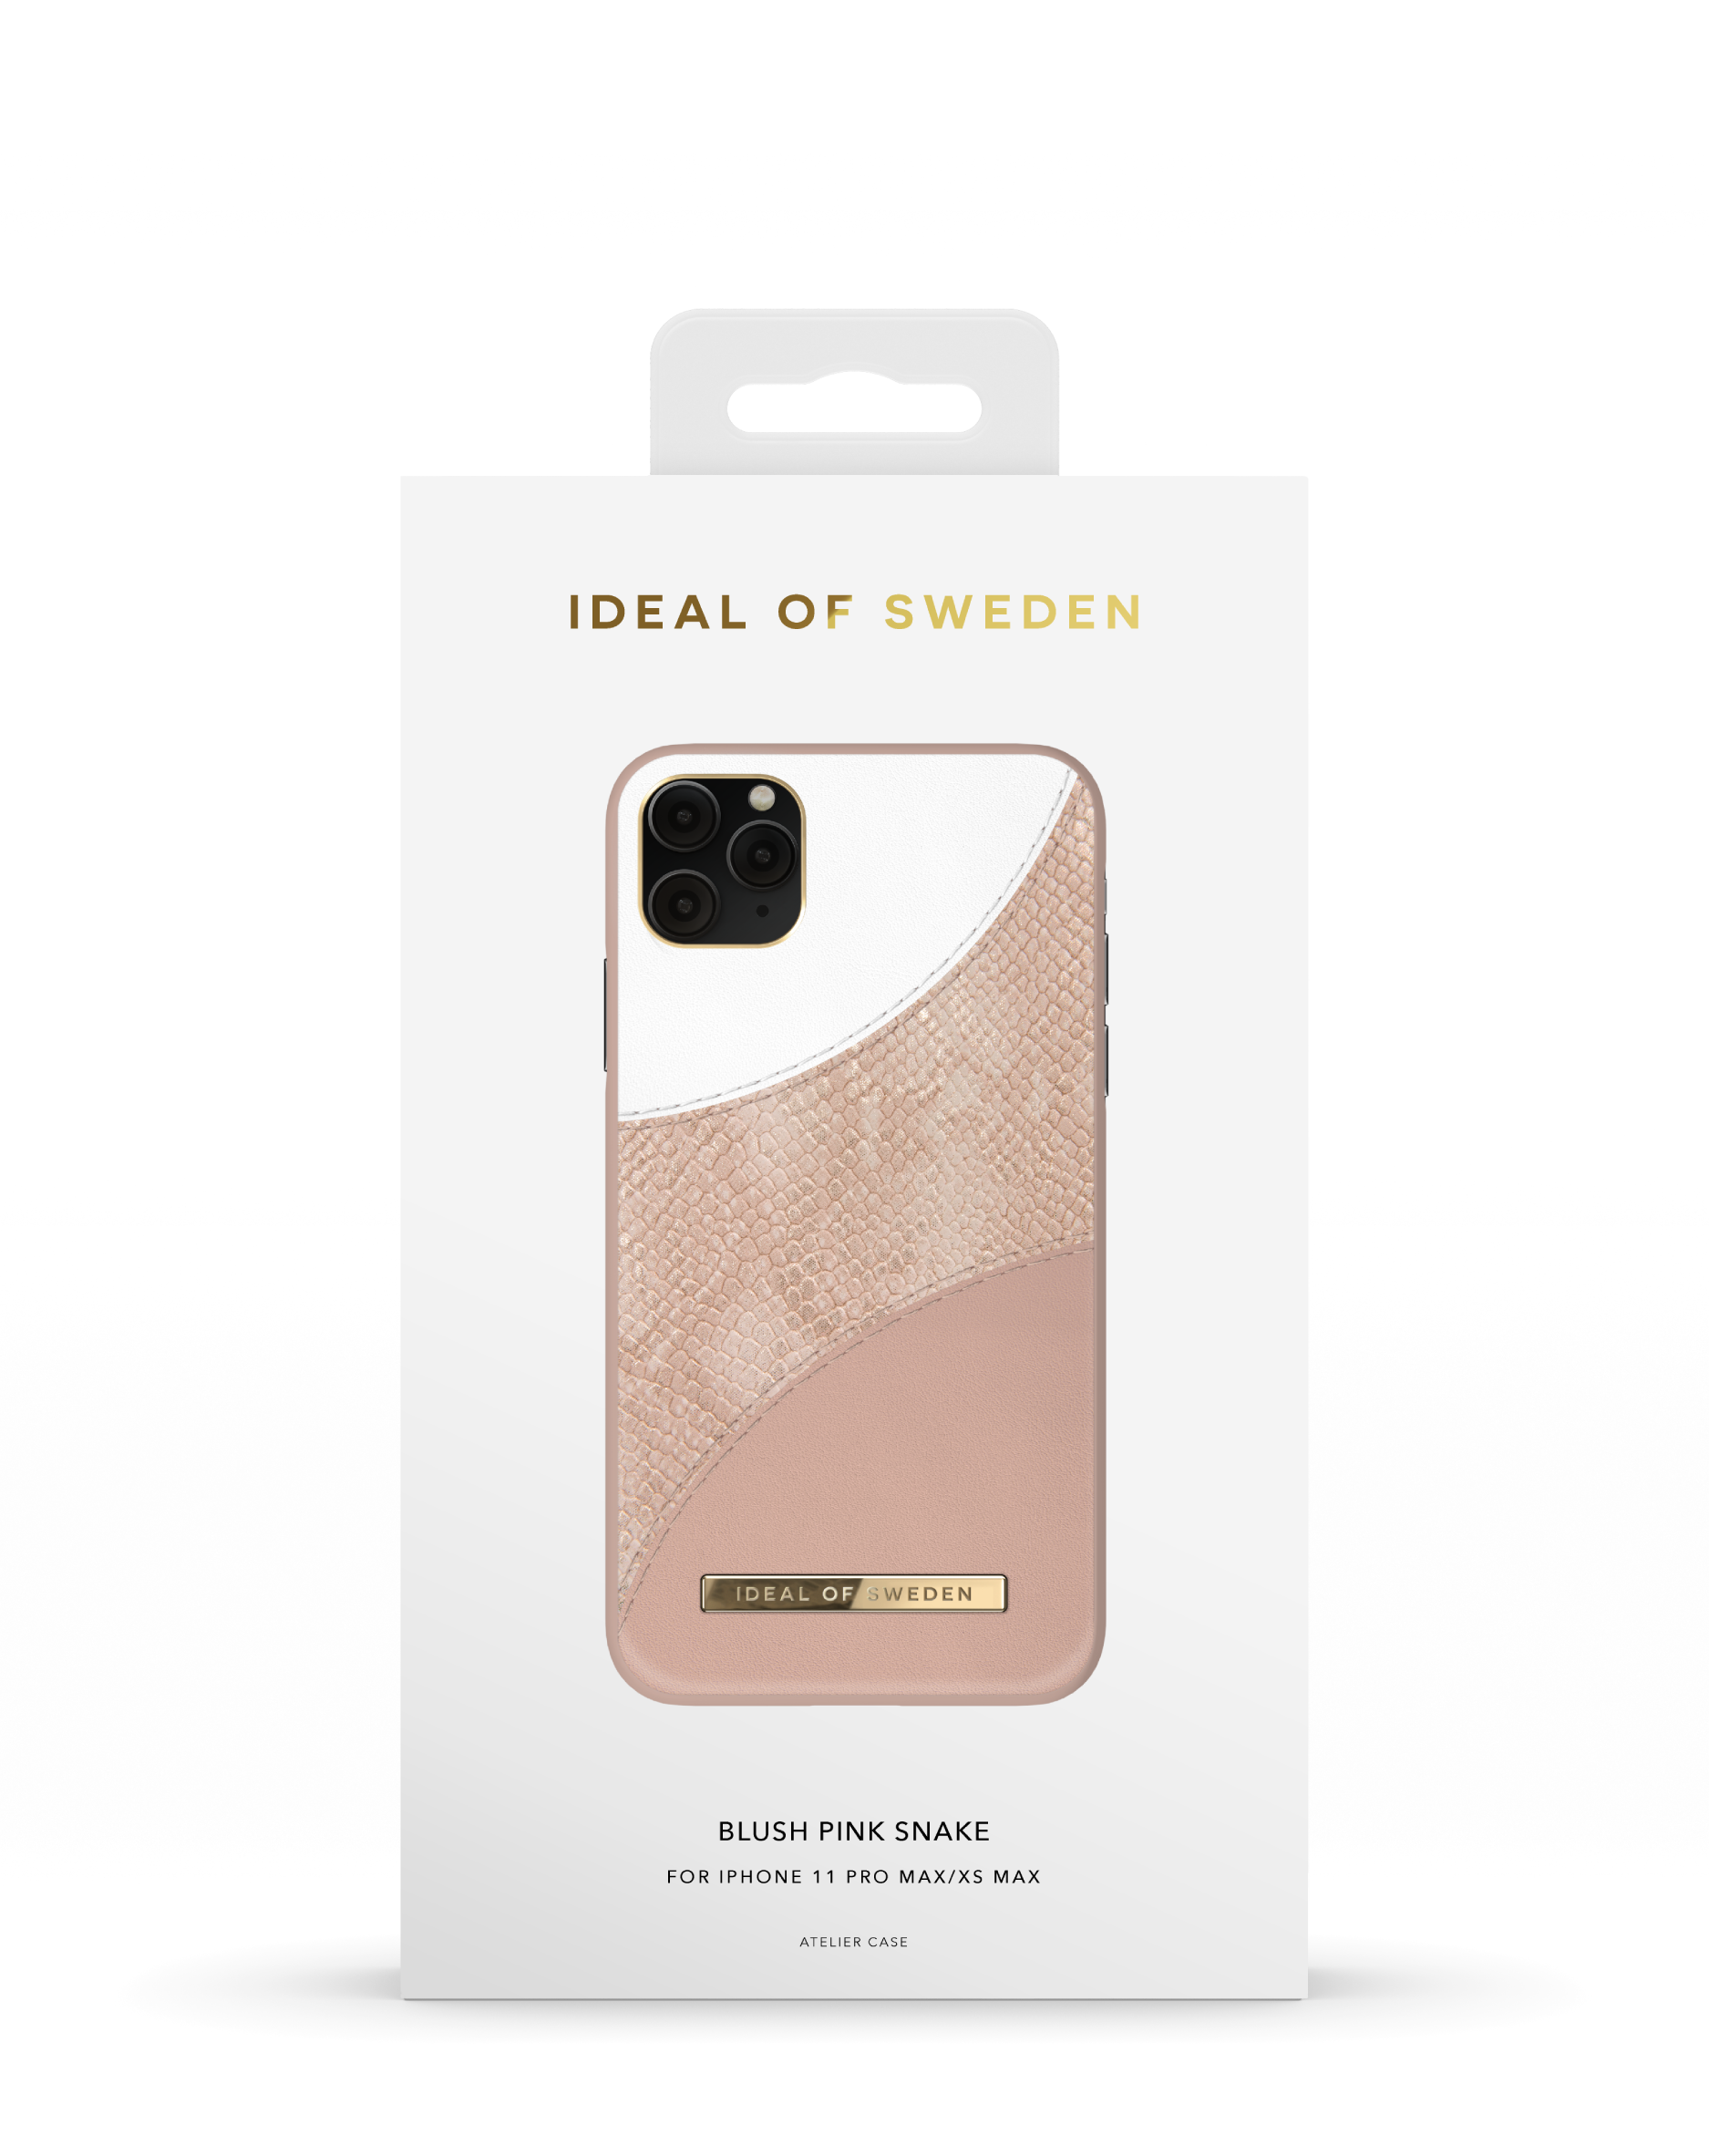 Blush iPhone Pink Snake Pro Apple iPhone Apple, 11 Backcover, XS IDEAL IDACSS21-I1965-269, SWEDEN Max, OF Apple Max,